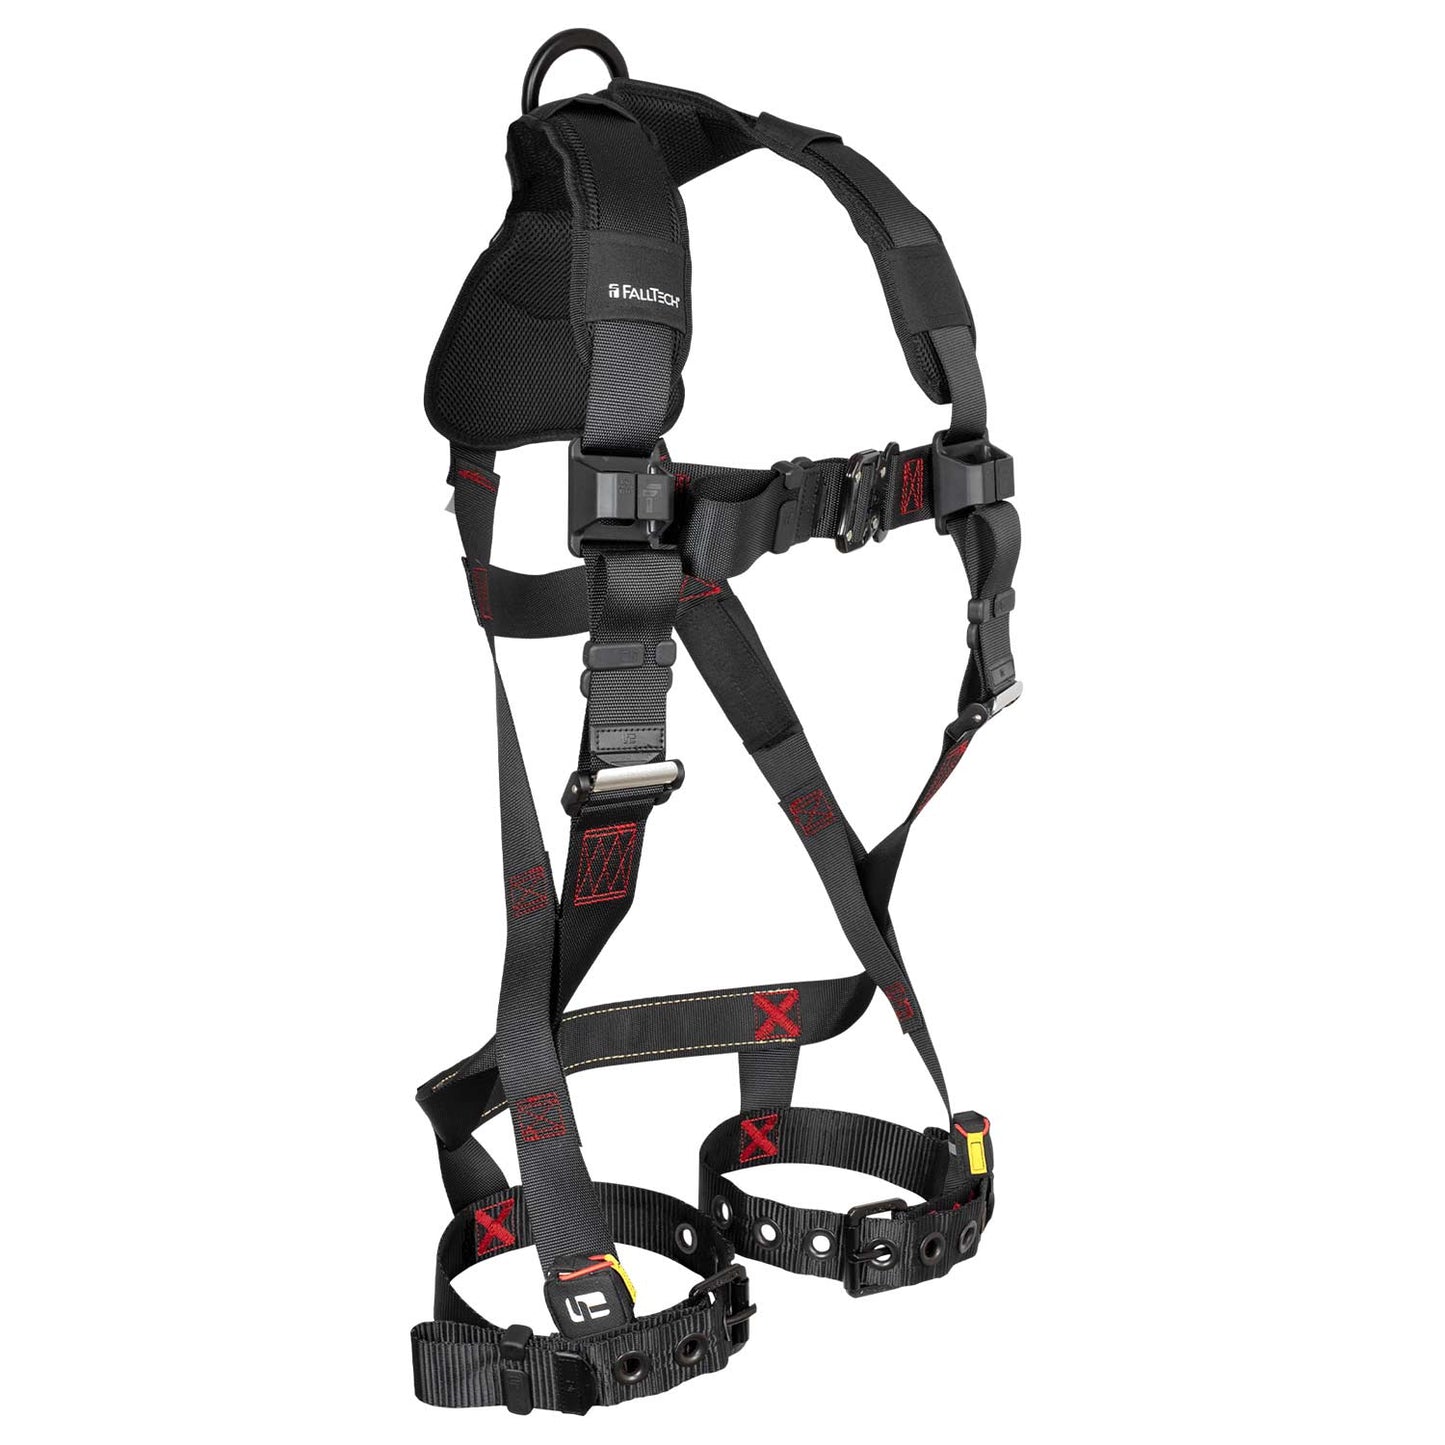 FallTech FT-Iron Full-Body Safety Harness w/ Trauma Straps | Non-Belted | S/M | 8143BSM